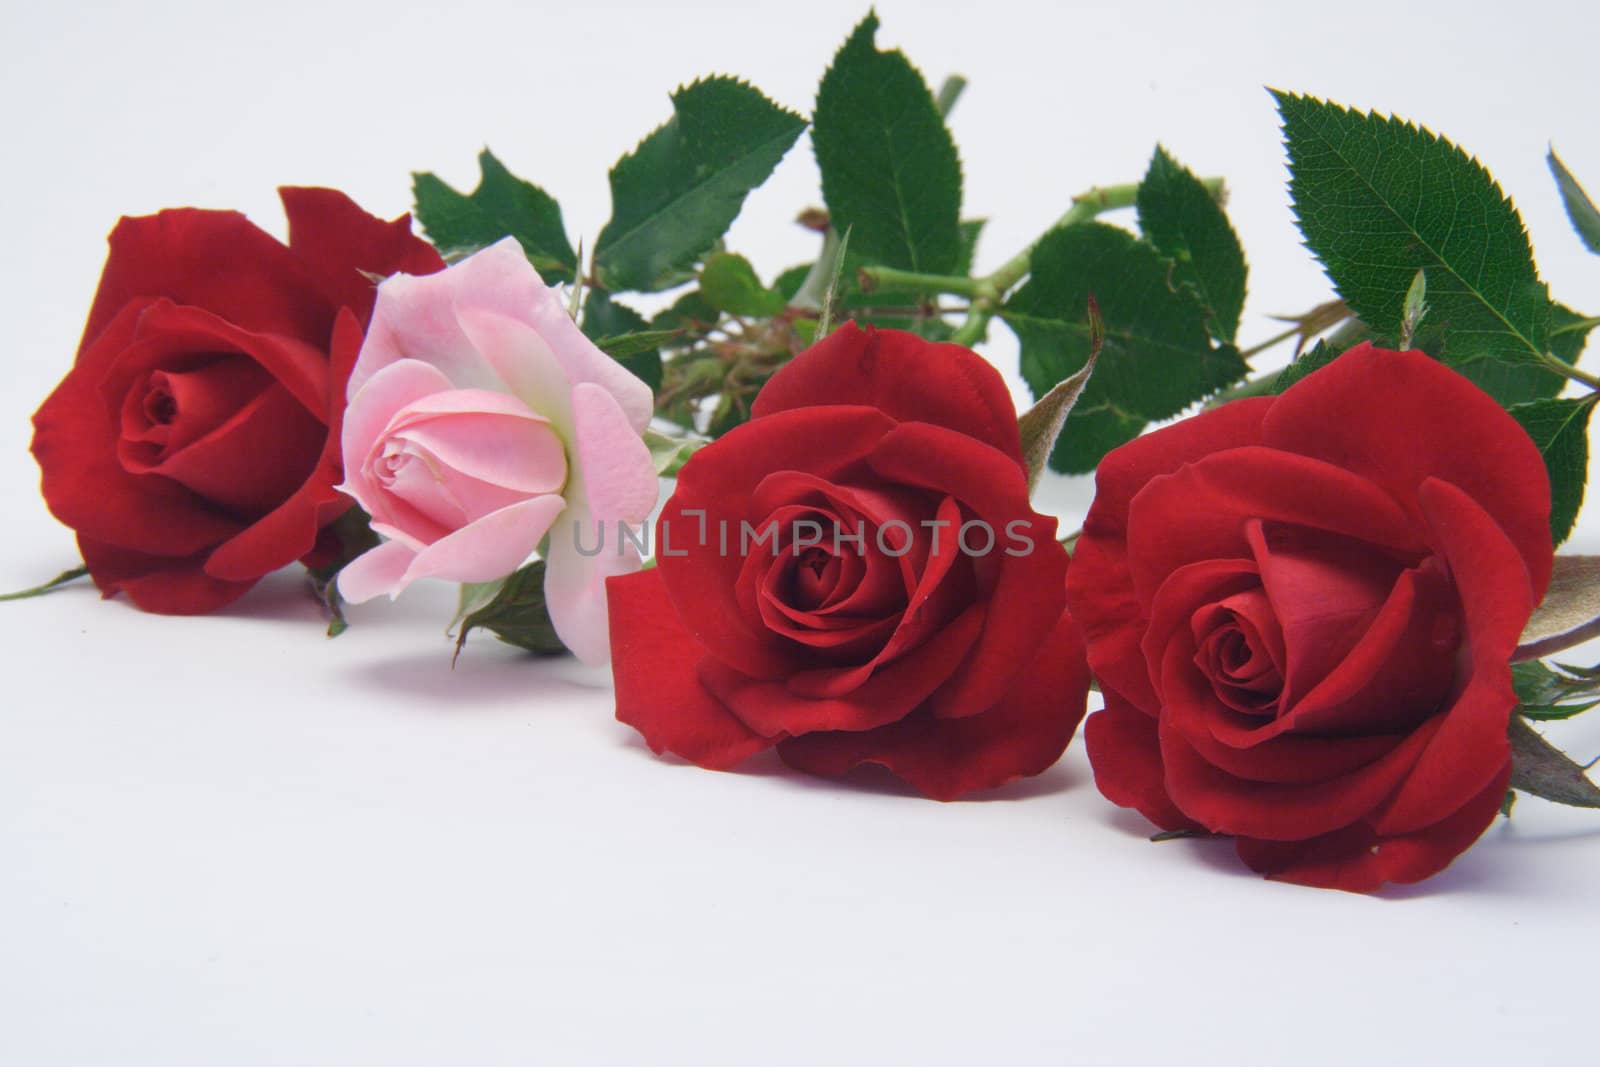 A line of red roses broken by one pink rosebud